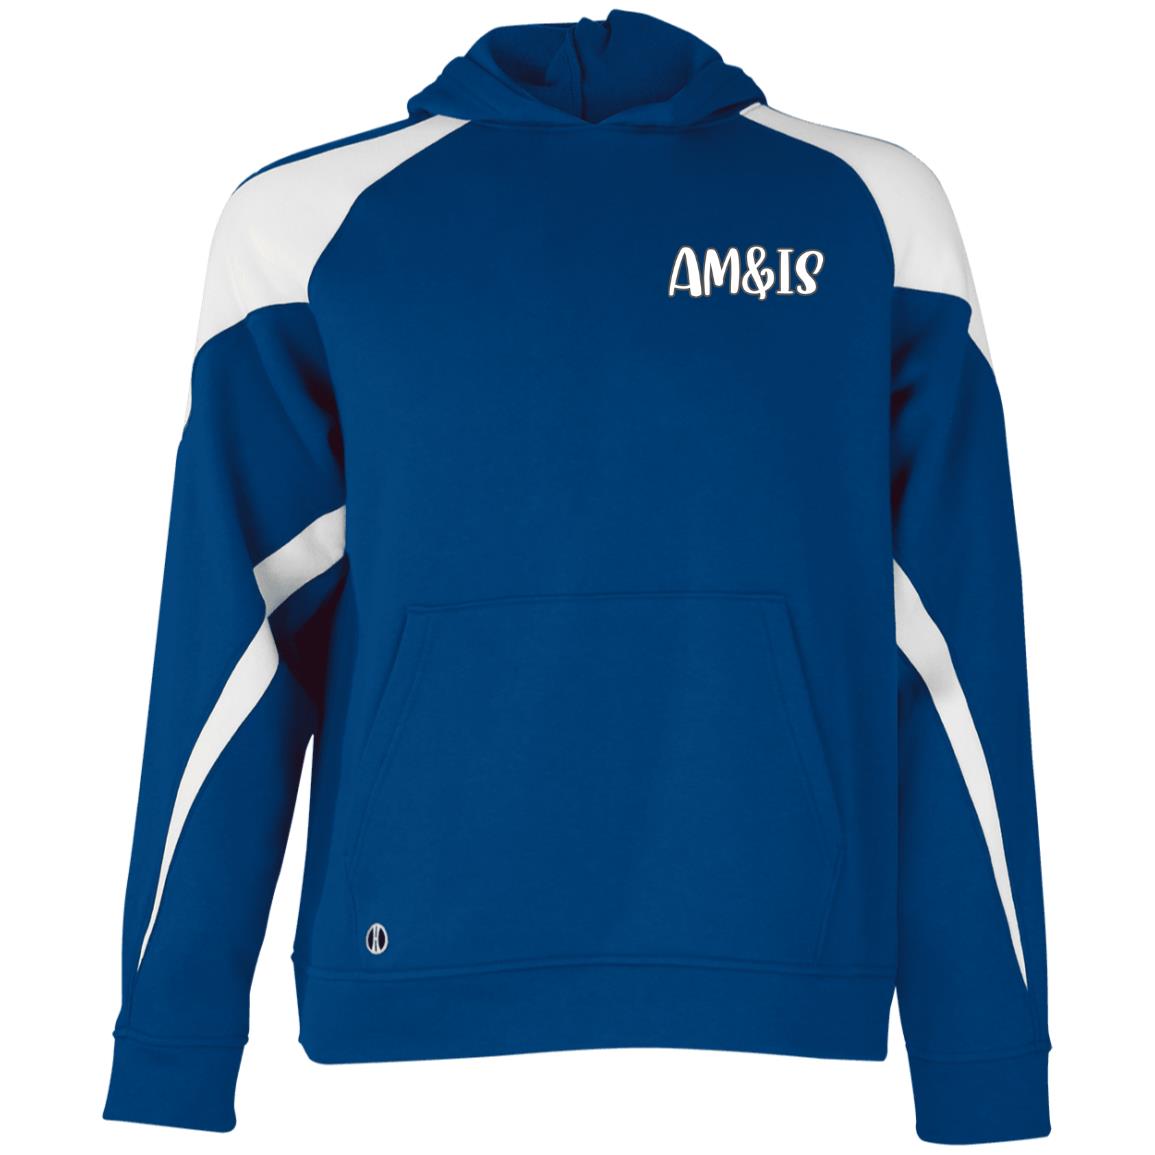 ROYAL/WHITE - AM&IS Activewear Youth Athletic Colorblock Fleece Hoodie - kids hoodie at TFC&H Co.